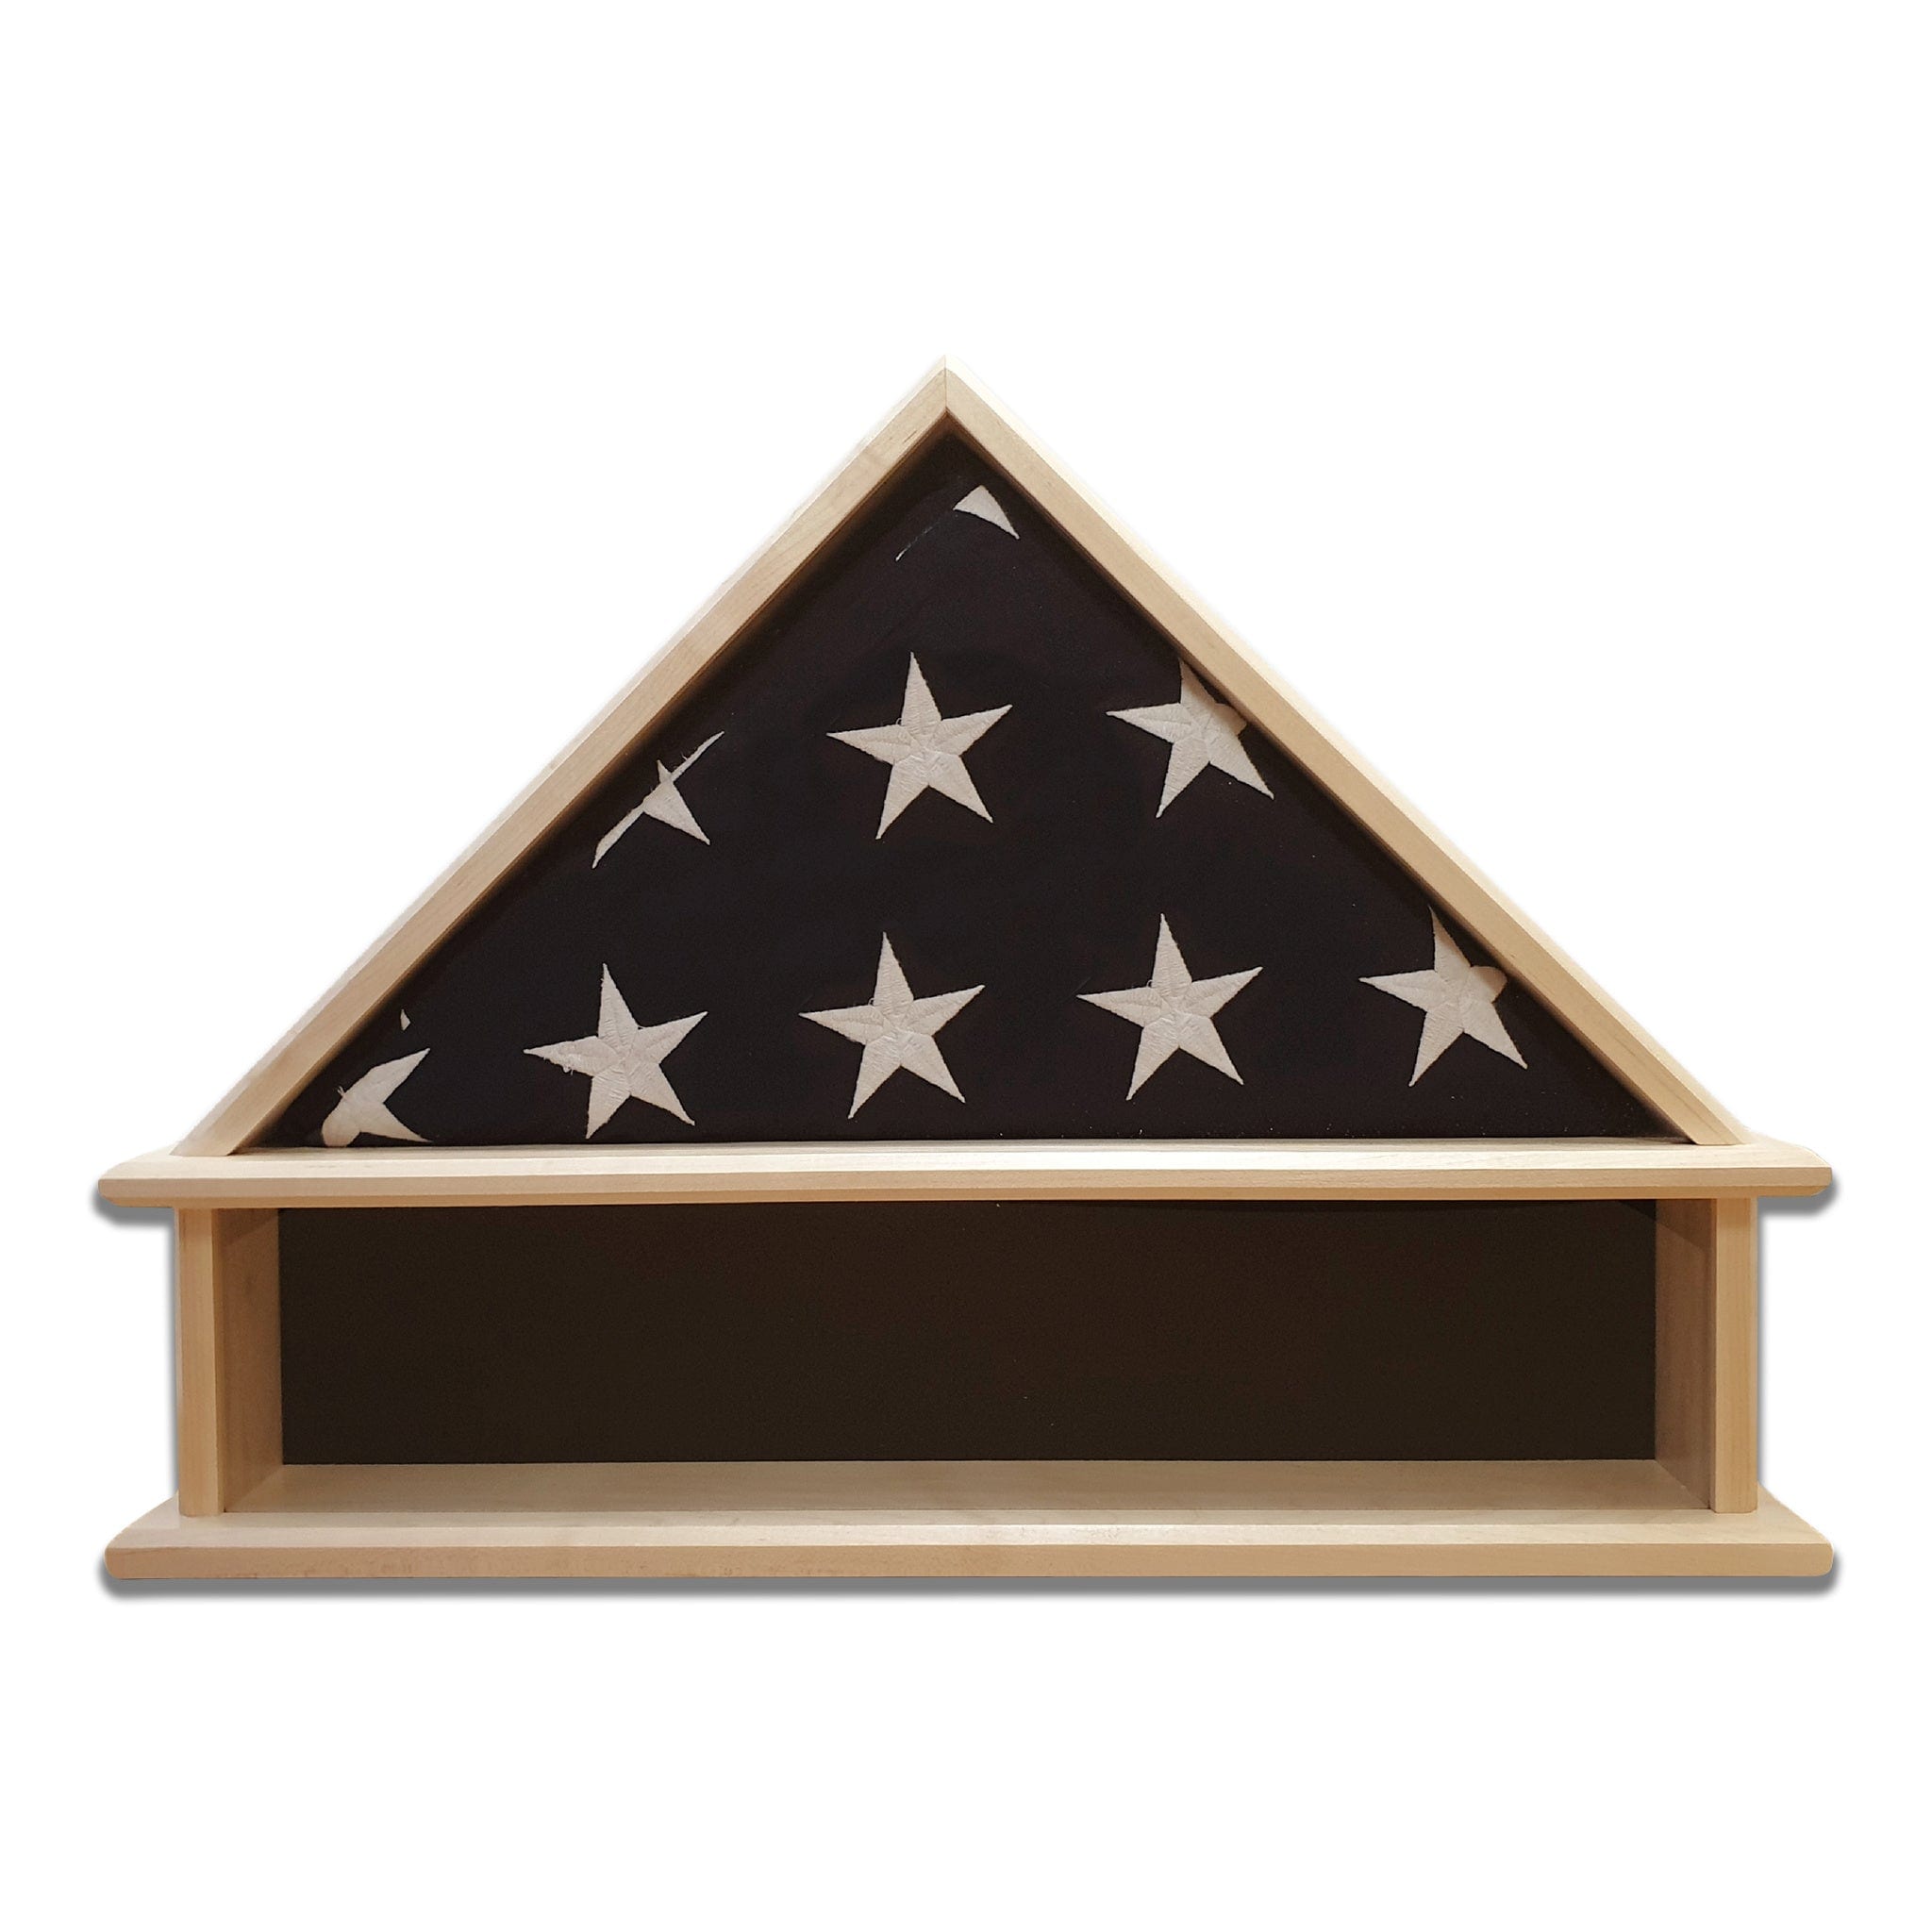 Maple Burial Flag Display Case with shadow box section for the base. Holds a 5'x9.5' Burial Flag.